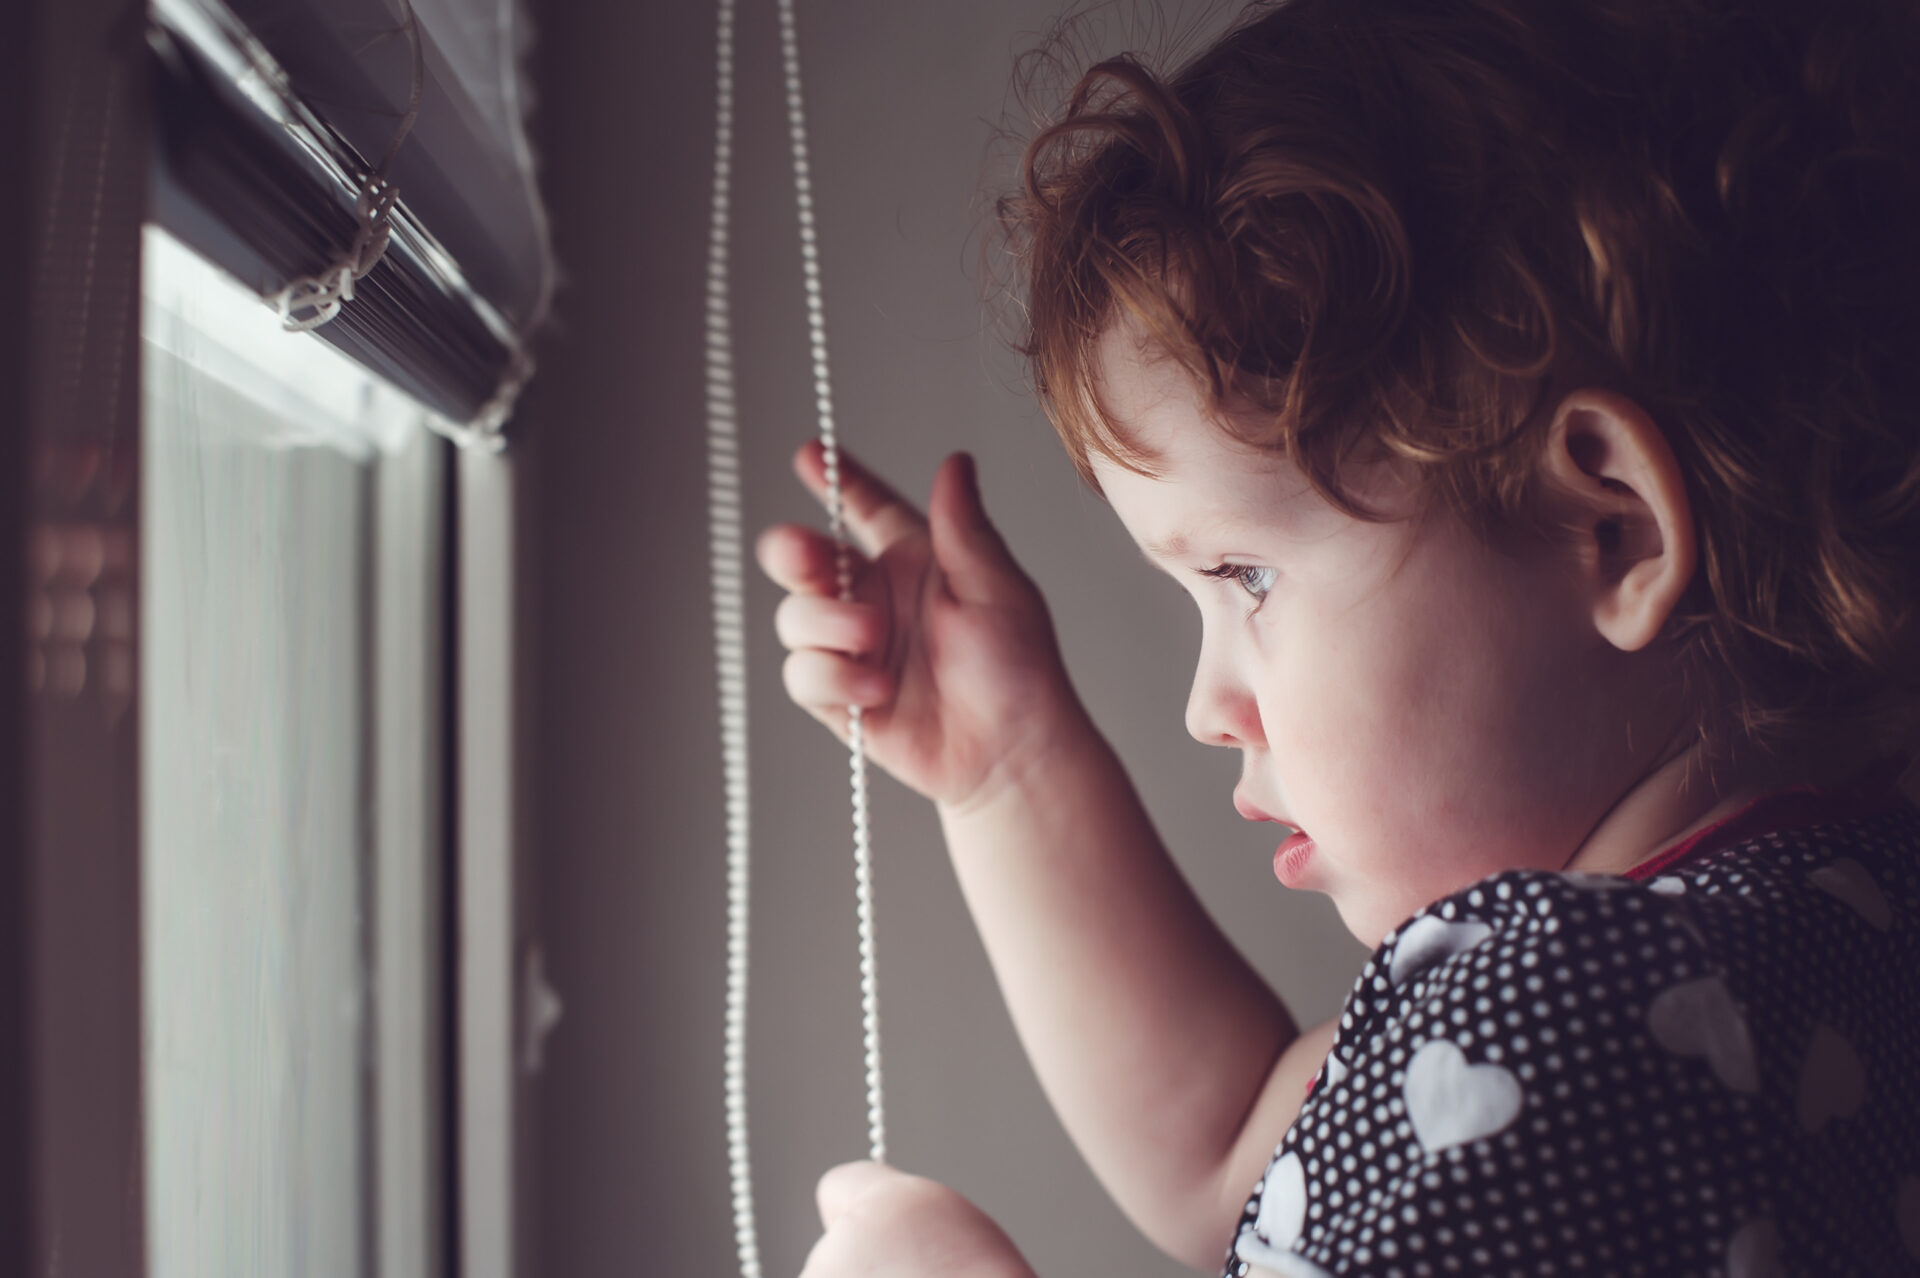 Child pulling the cord on a window blind